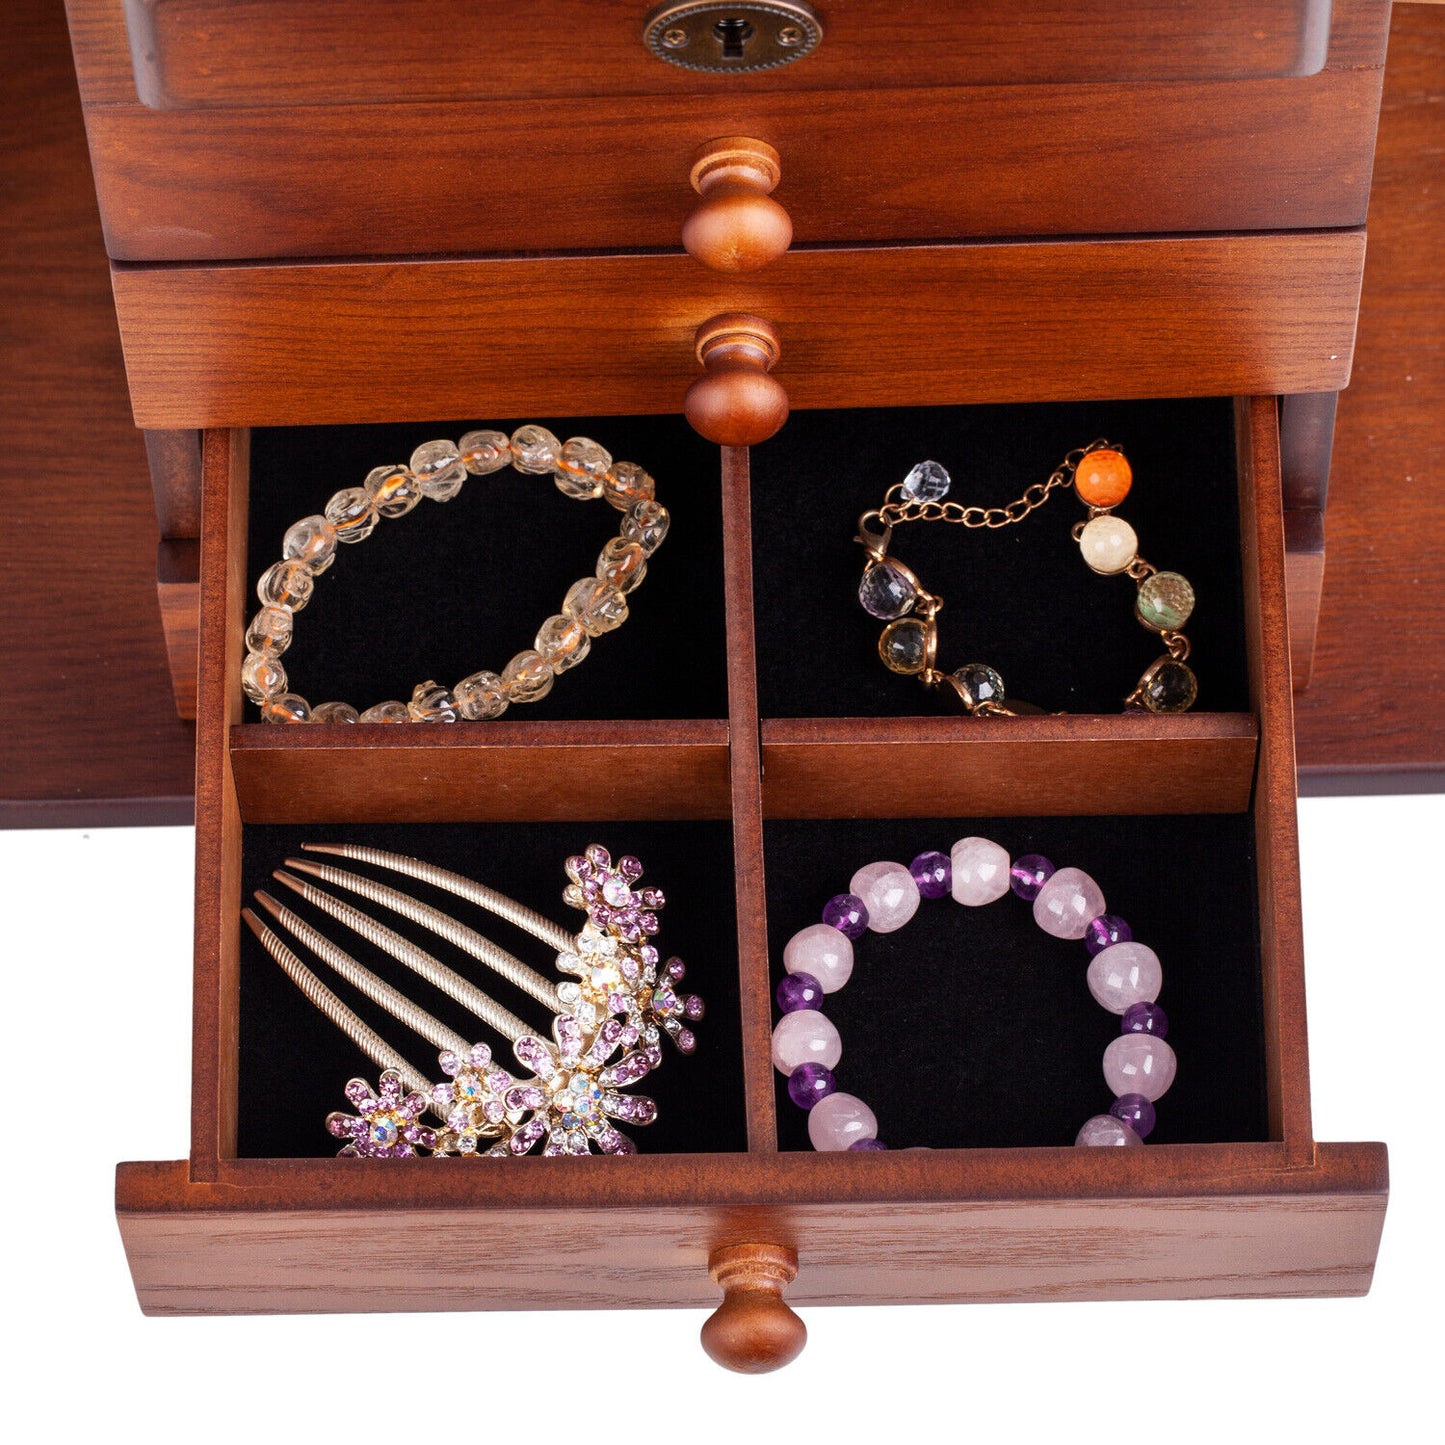 Elegant Wooden Jewelry Armoire: Large Storage for Rings & Necklaces